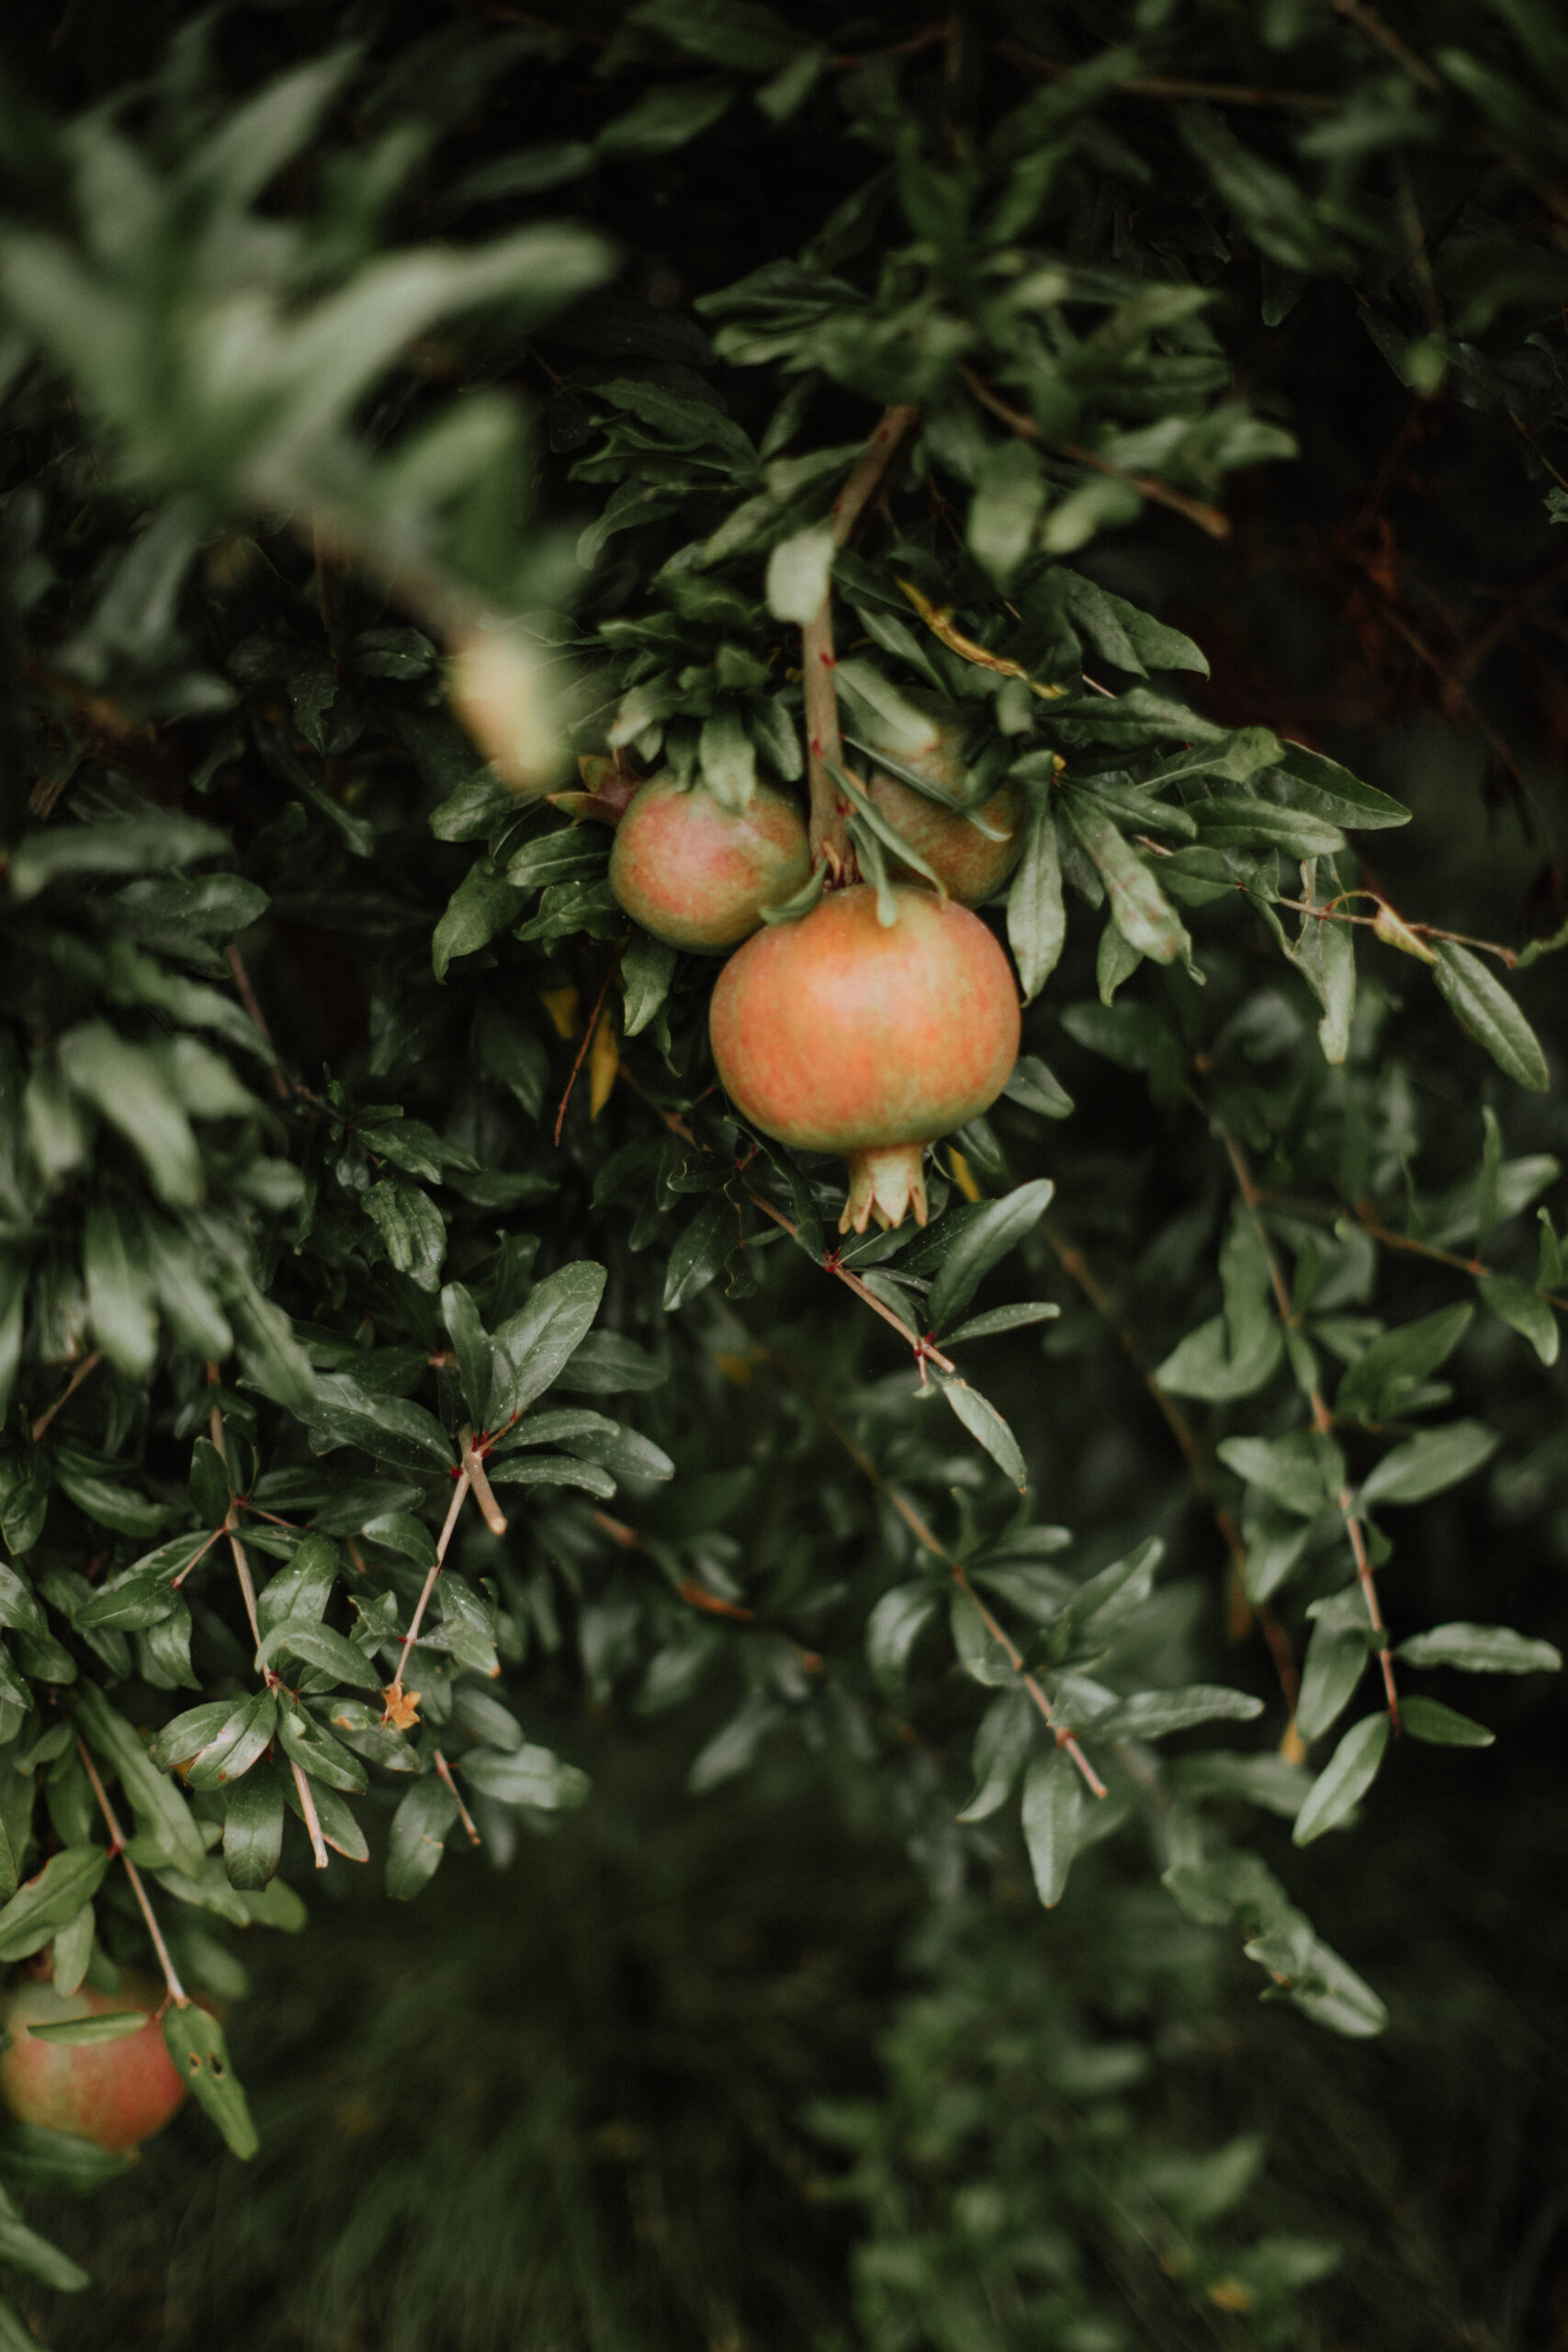 Tomatoes on the vine at a Napa valley vineyard wedding venue